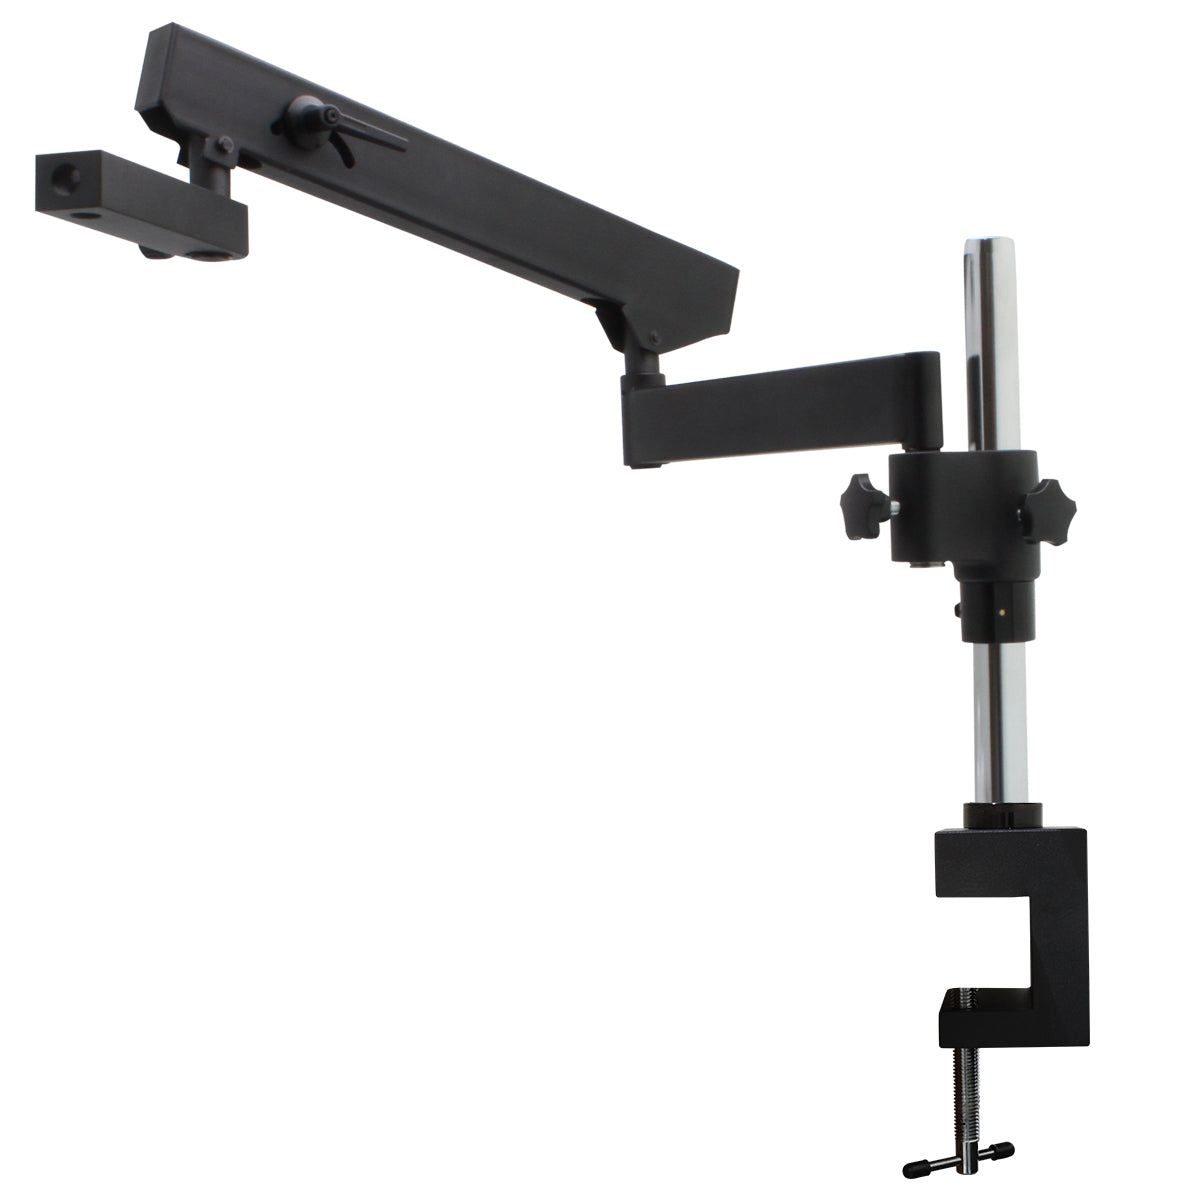 SPZV-50 Stereo Zoom Microscope [6.7x - 50x] on Articulating Arm Stand with Integrated Ring Light